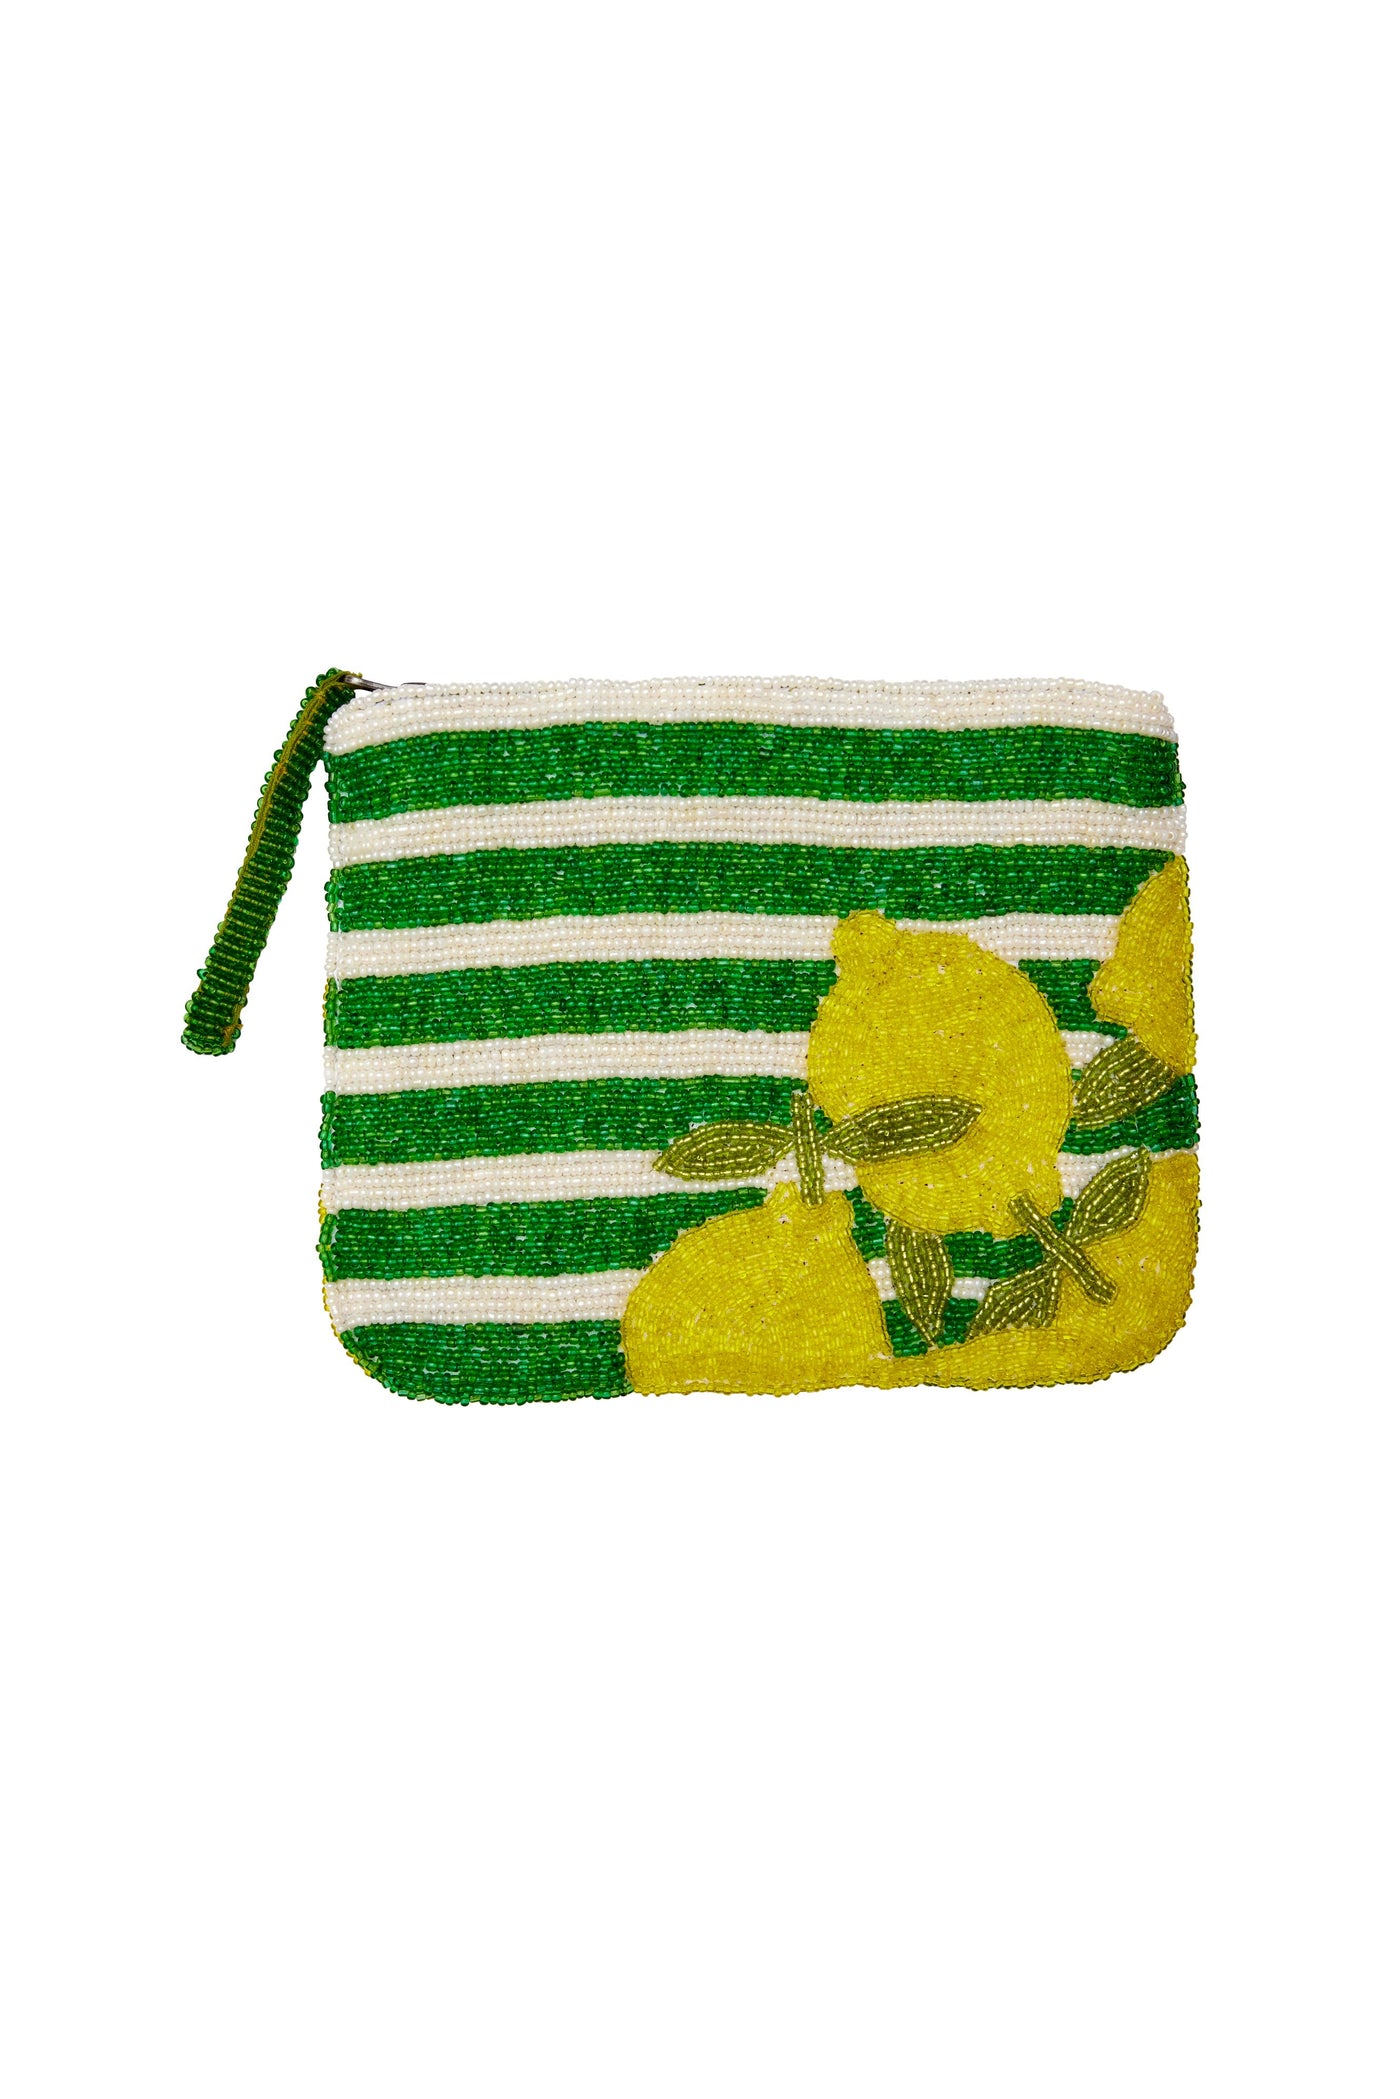 Stripes and Lemon Bead Purse - Green, White and Yellow